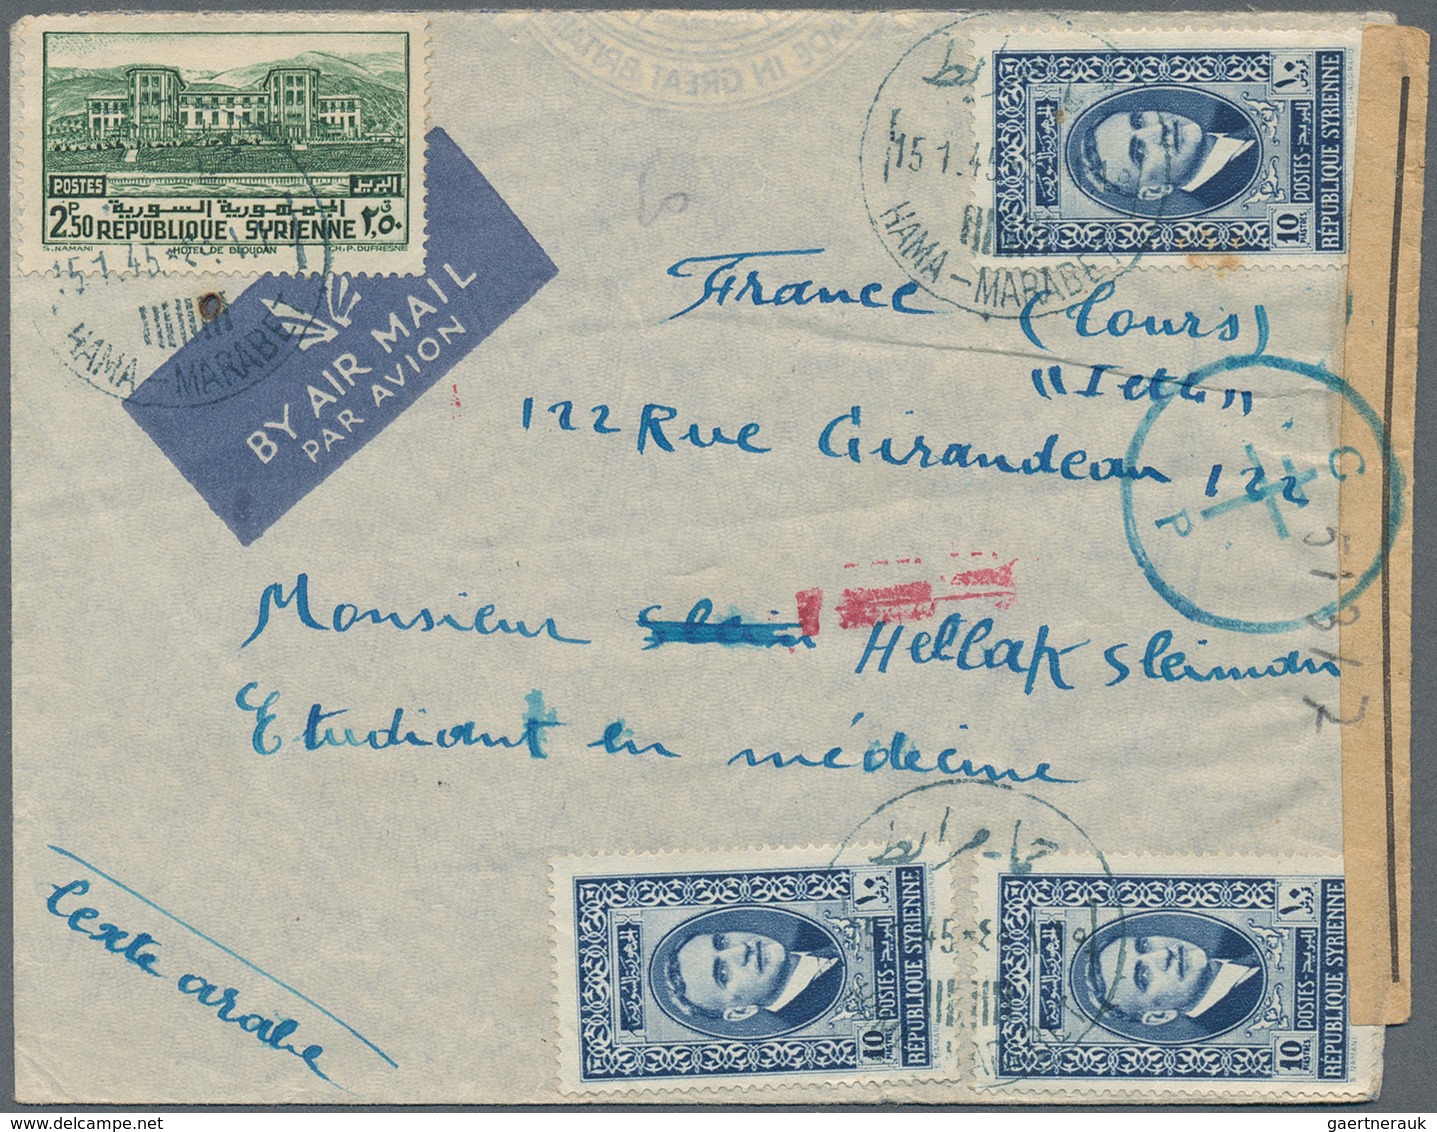 Syrien: 1892/1979 (ca.), covers (140) or used ppc (10) to foreign and mostly to Switzerland, Germany